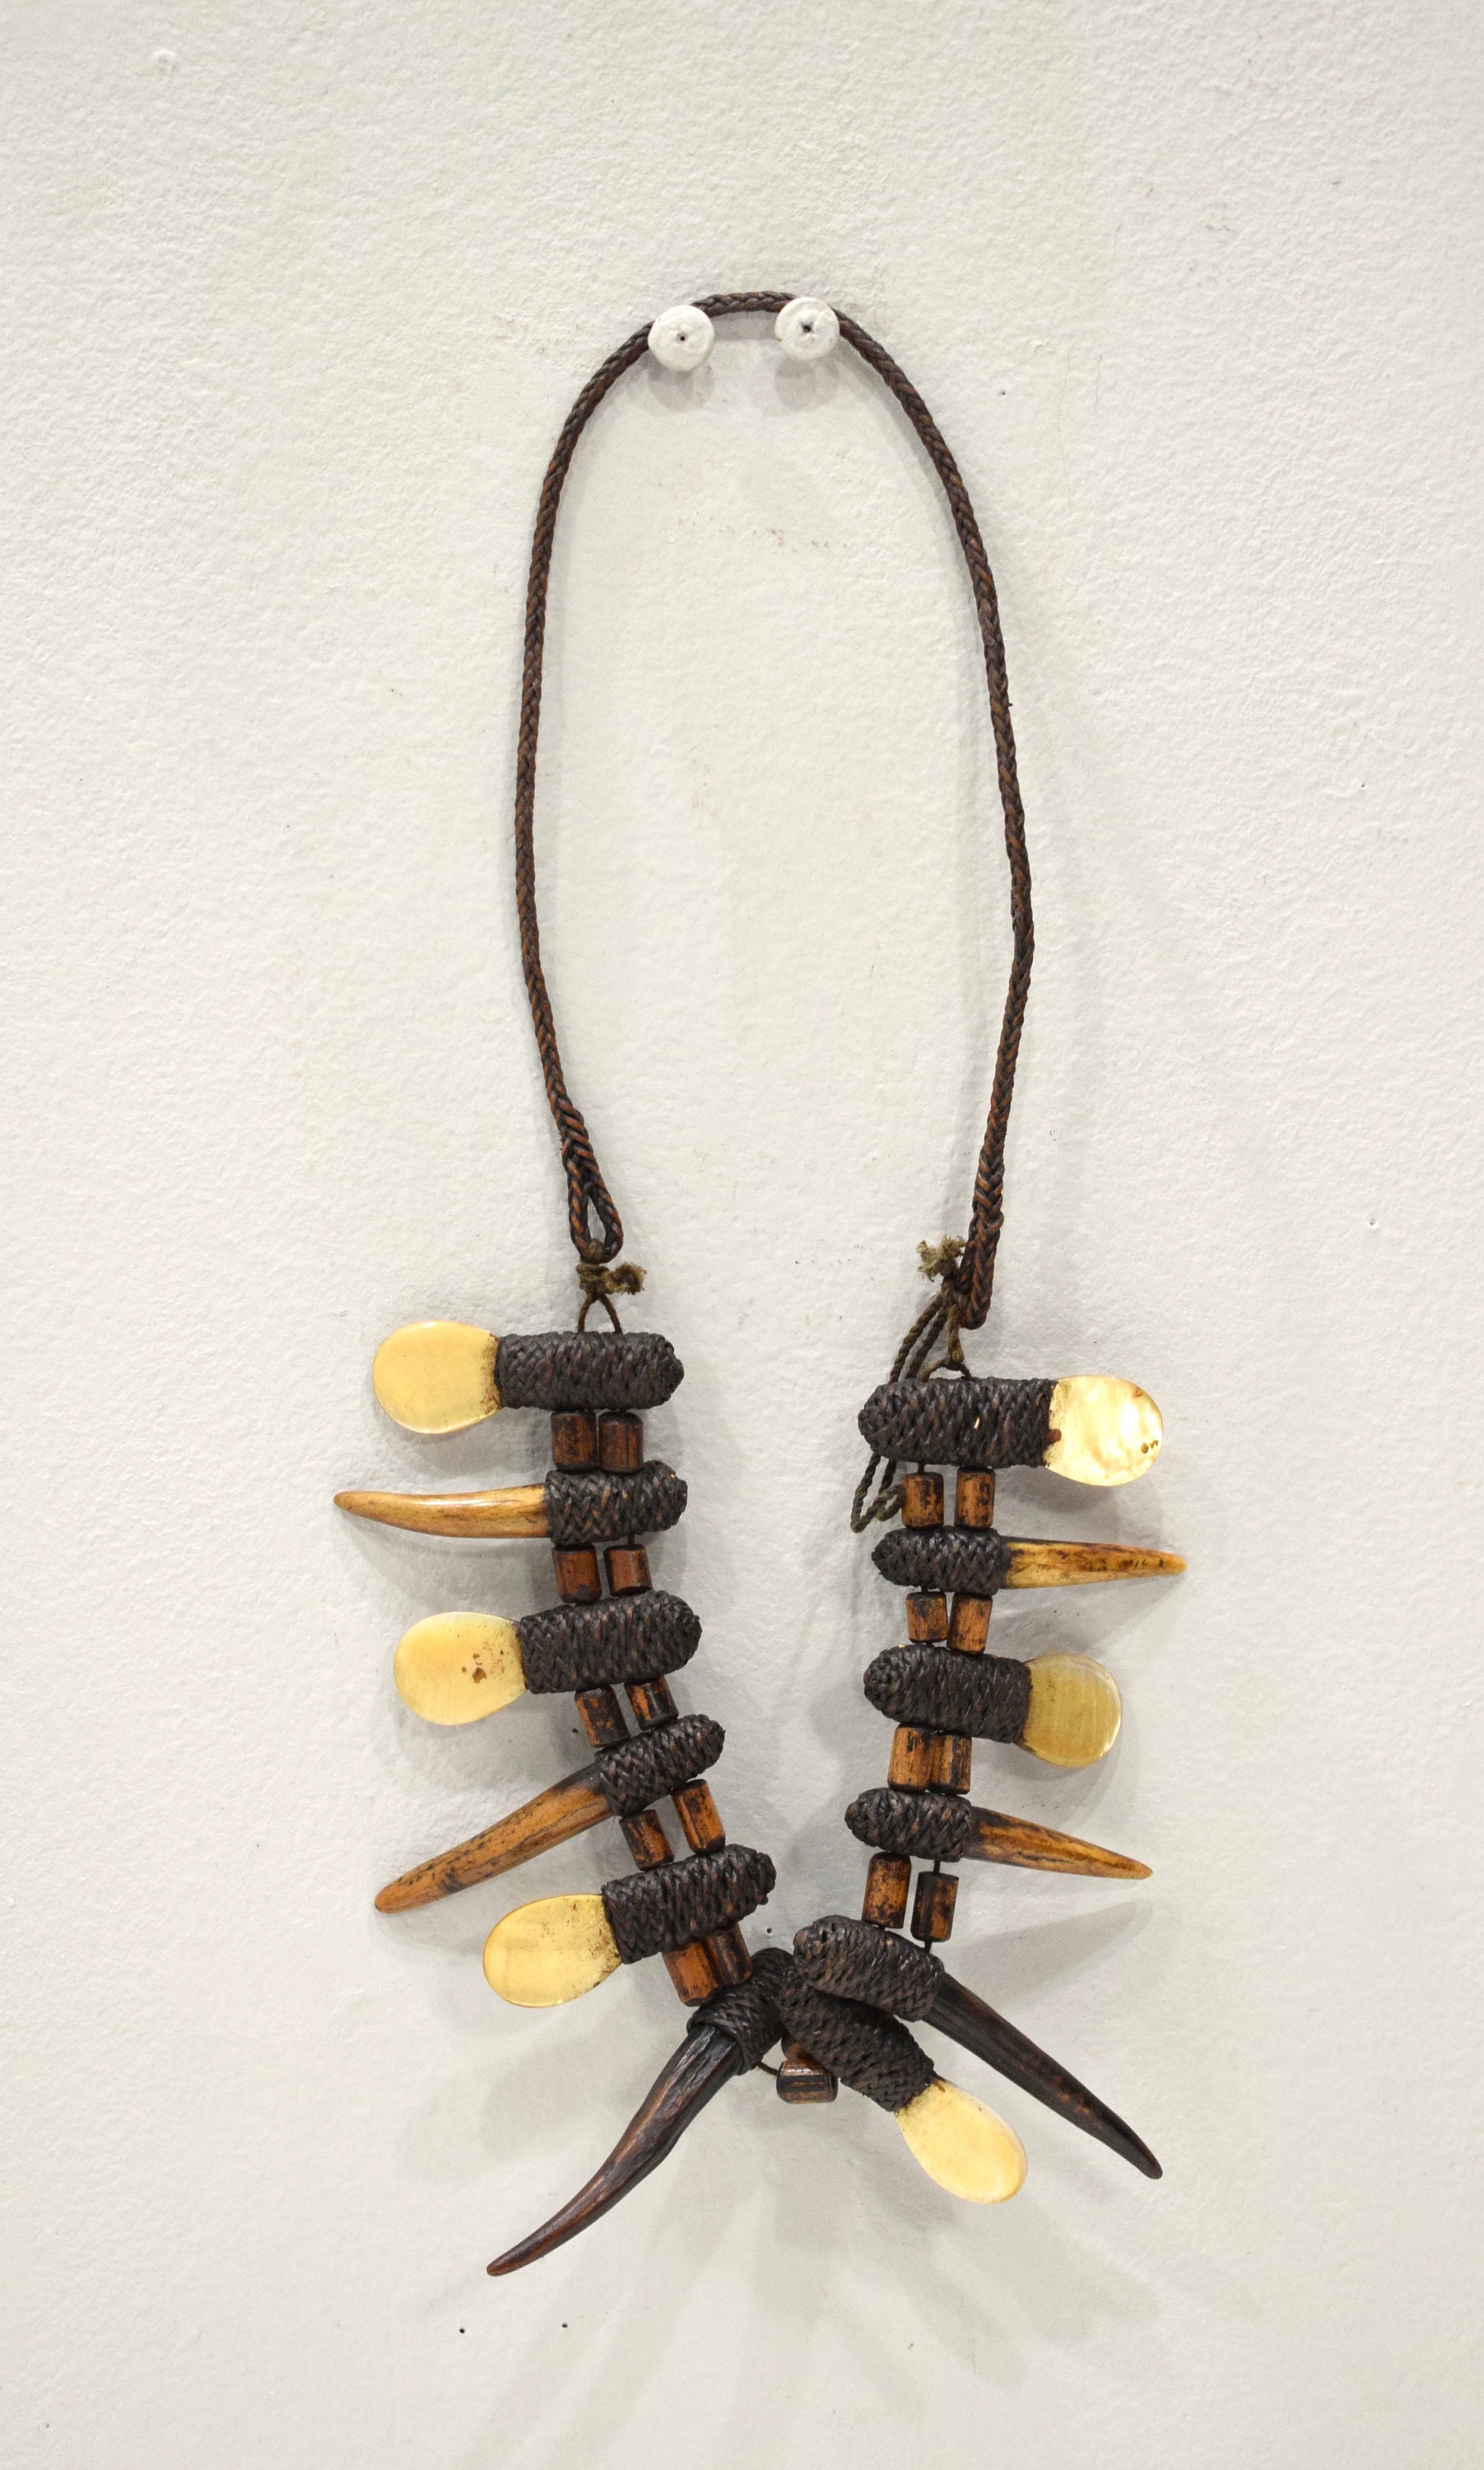 Necklace Philippine Ifugao Tribal Shell Claw Necklace Rattan Necklace